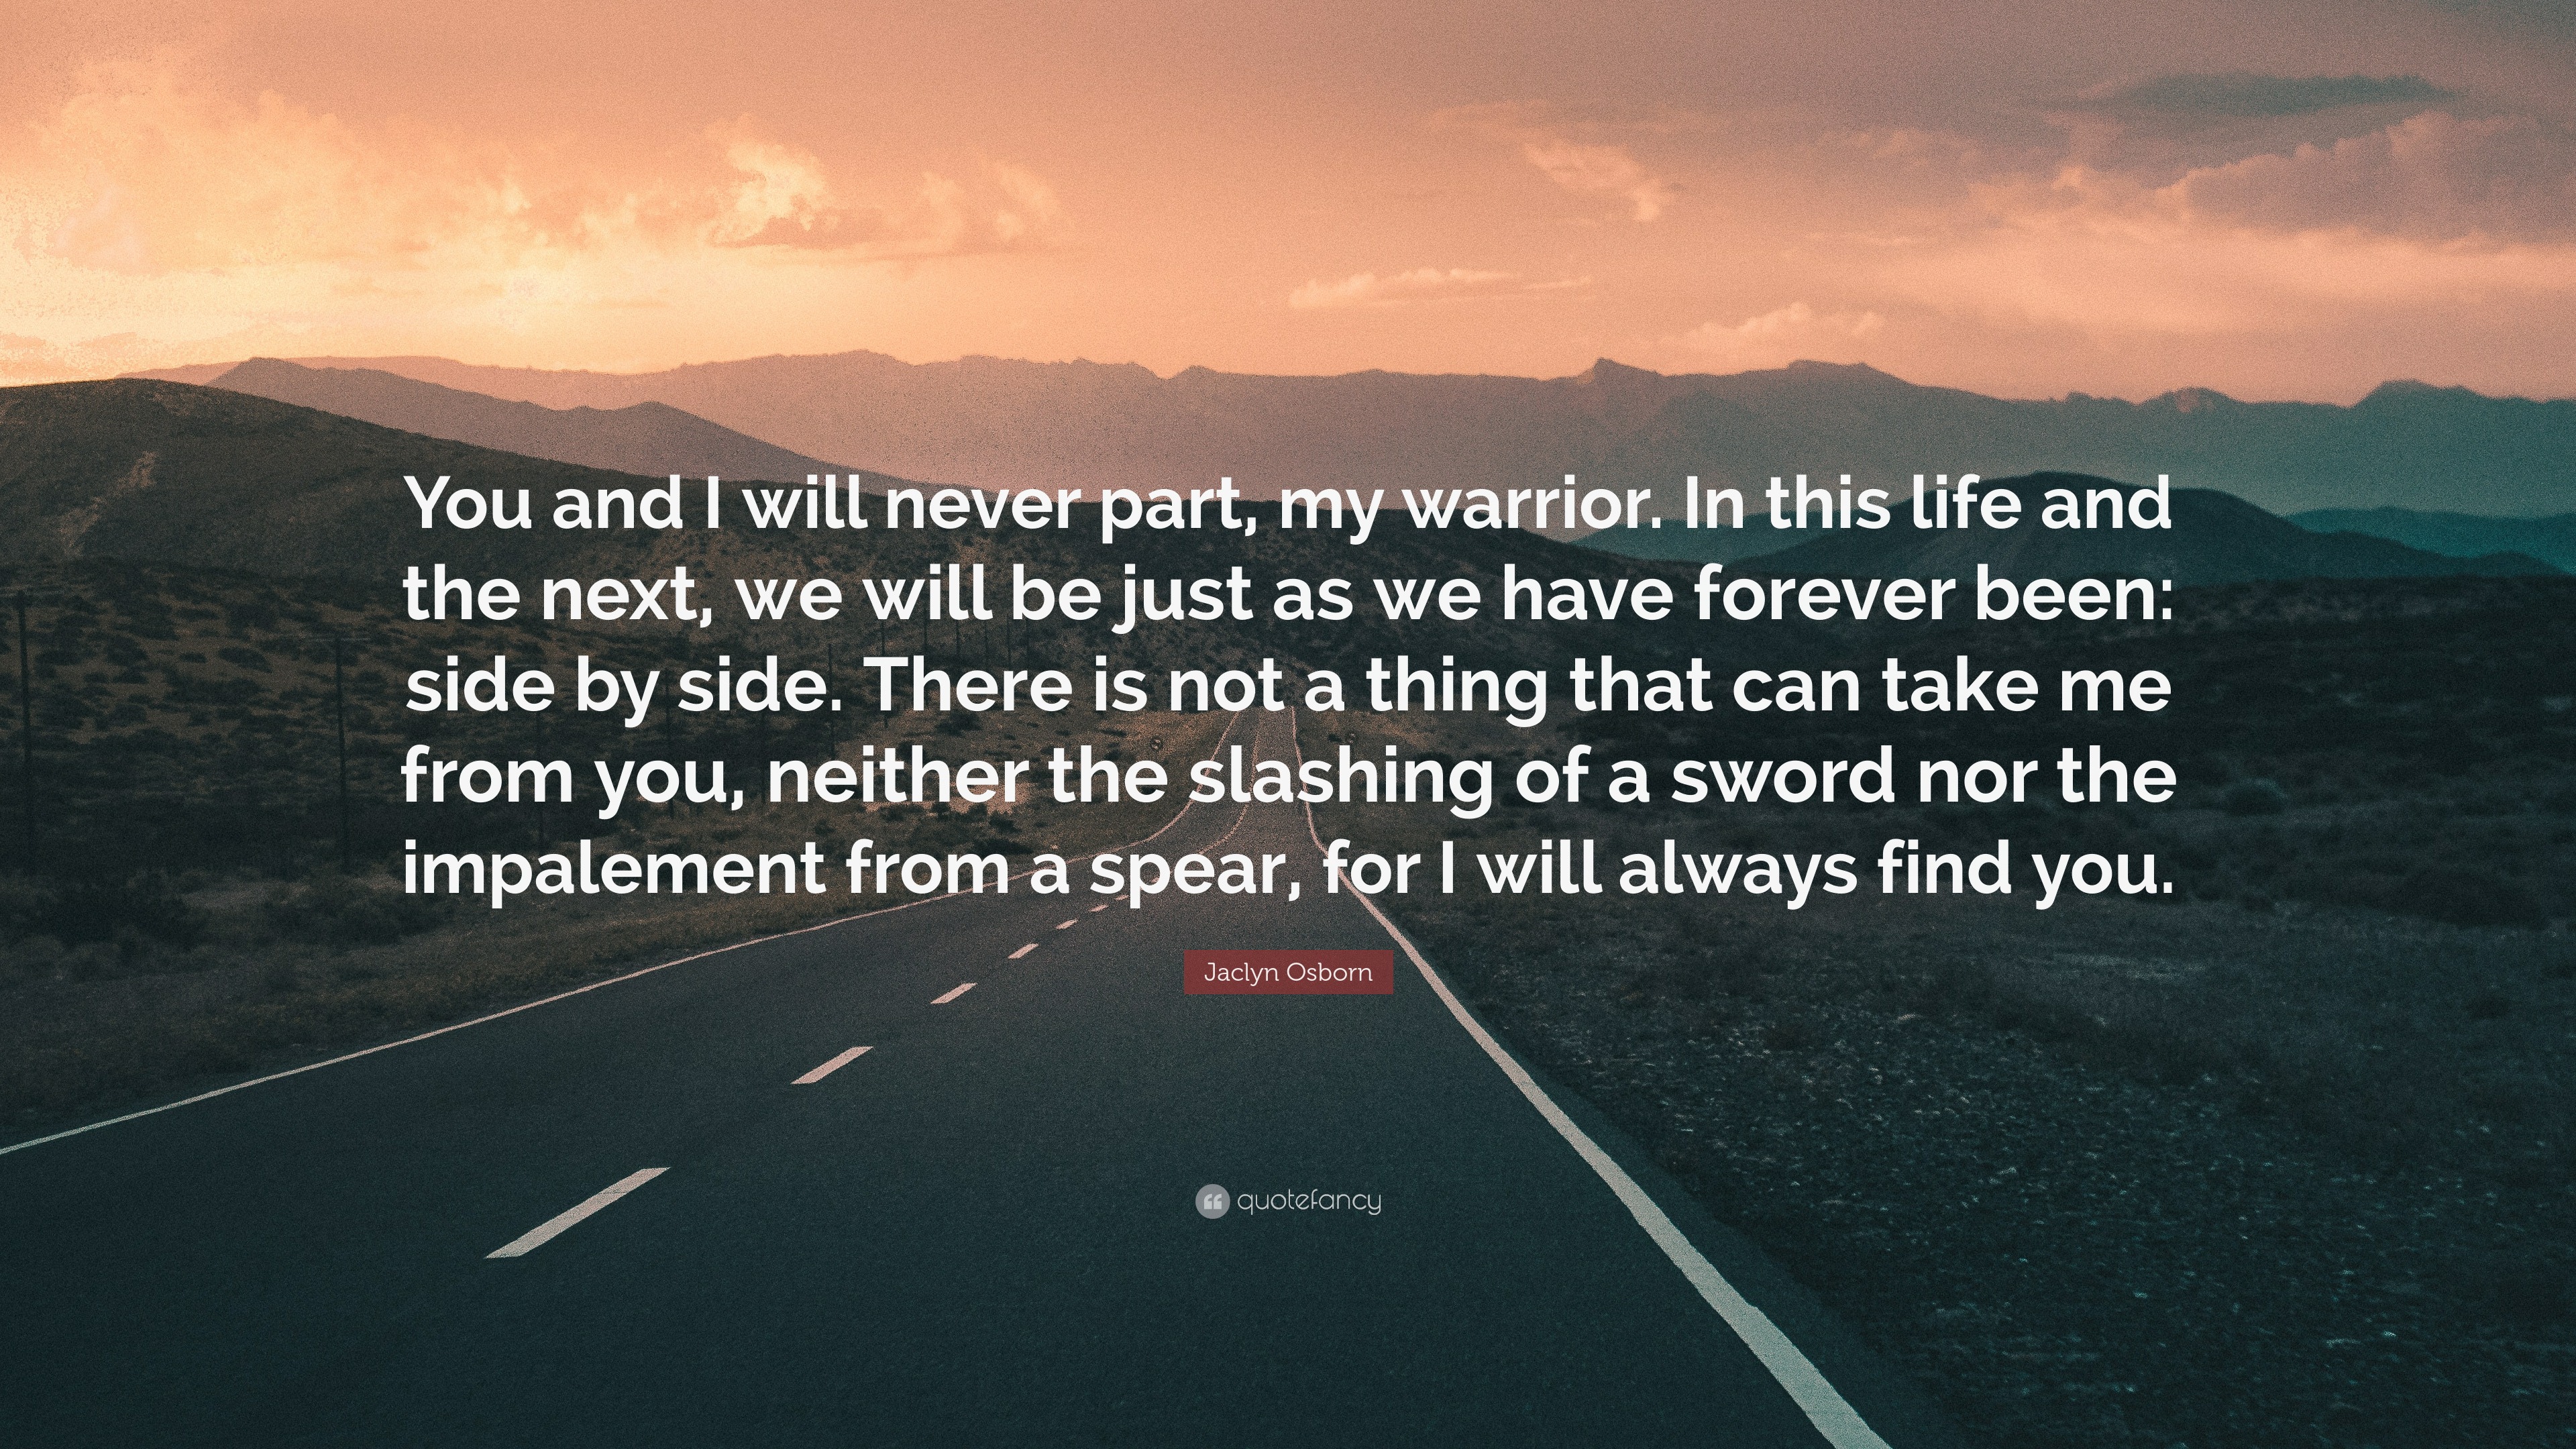 https://quotefancy.com/media/wallpaper/3840x2160/6463395-Jaclyn-Osborn-Quote-You-and-I-will-never-part-my-warrior-In-this.jpg